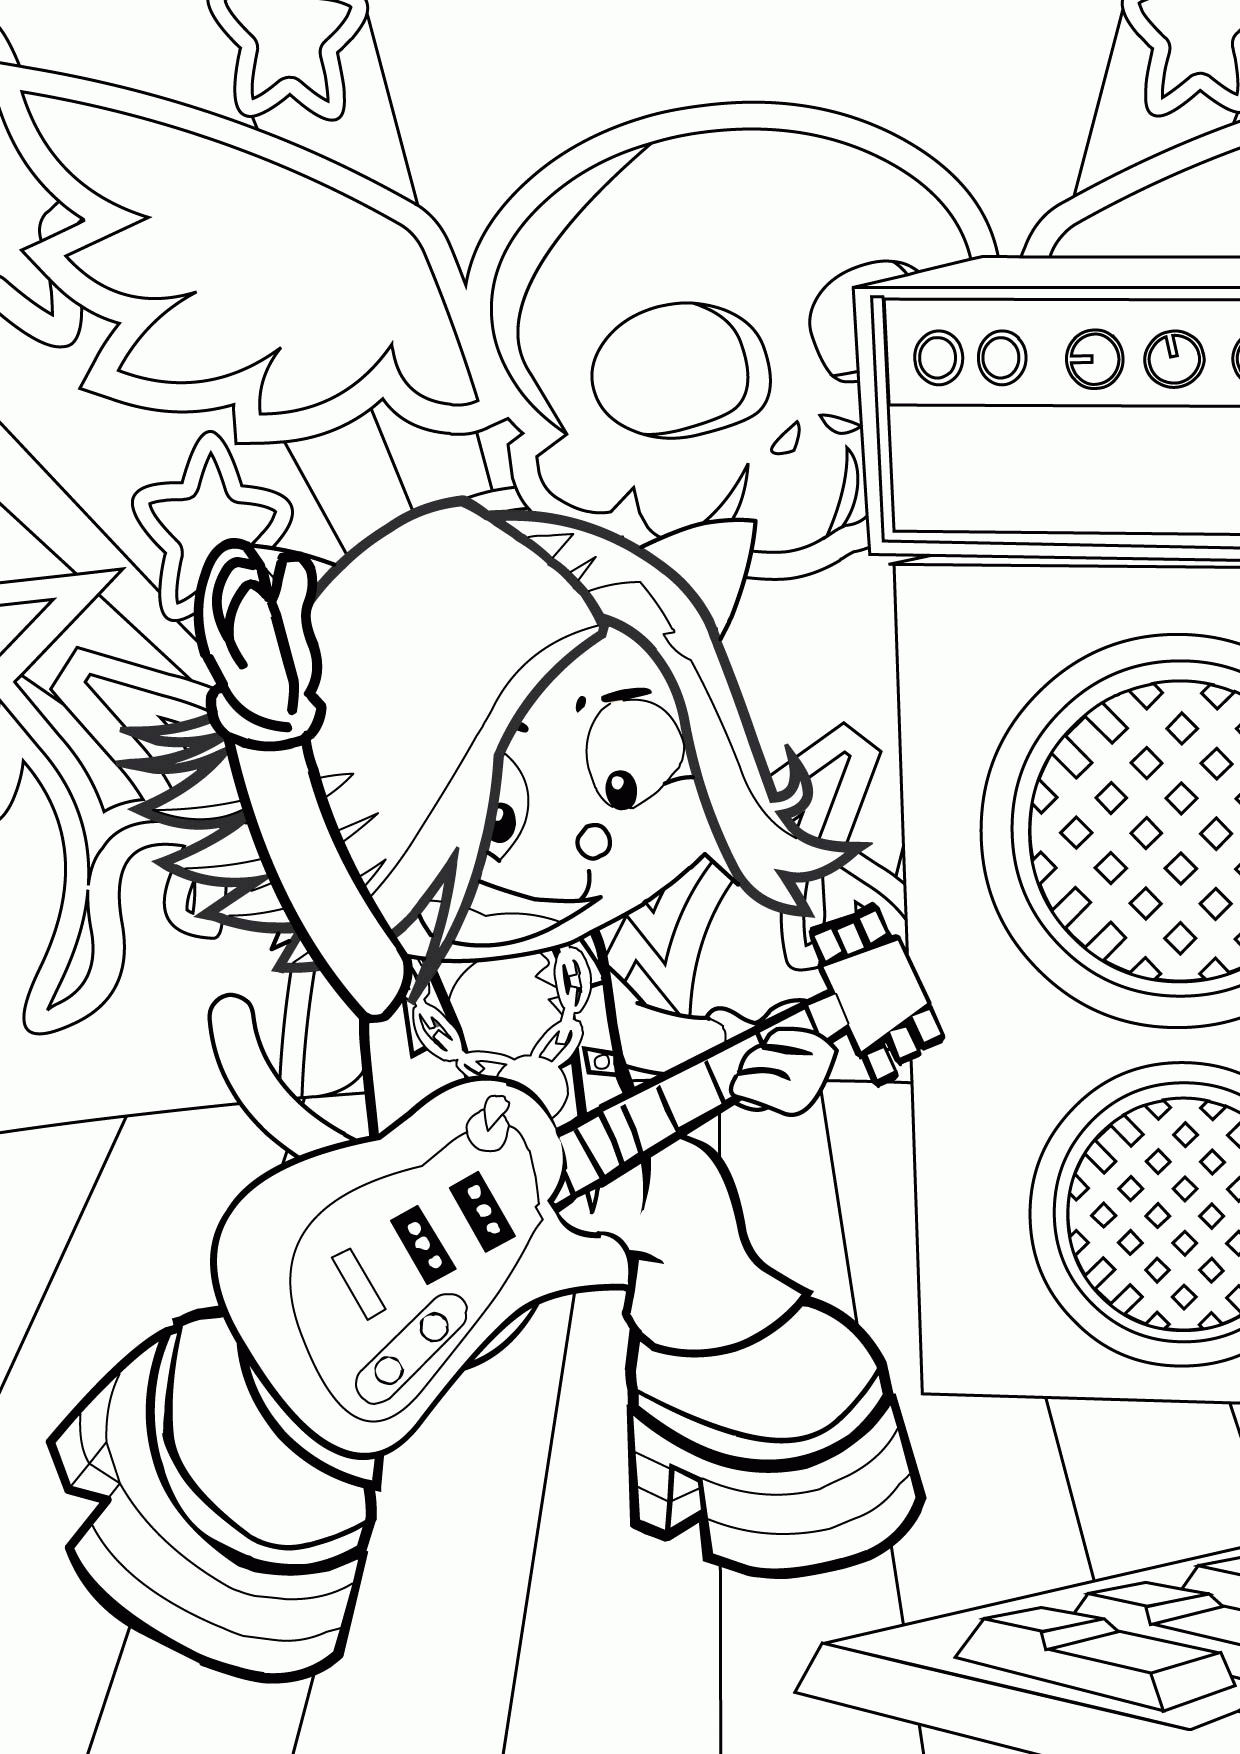 The Indie Rock Coloring Book Page   Coloring Home